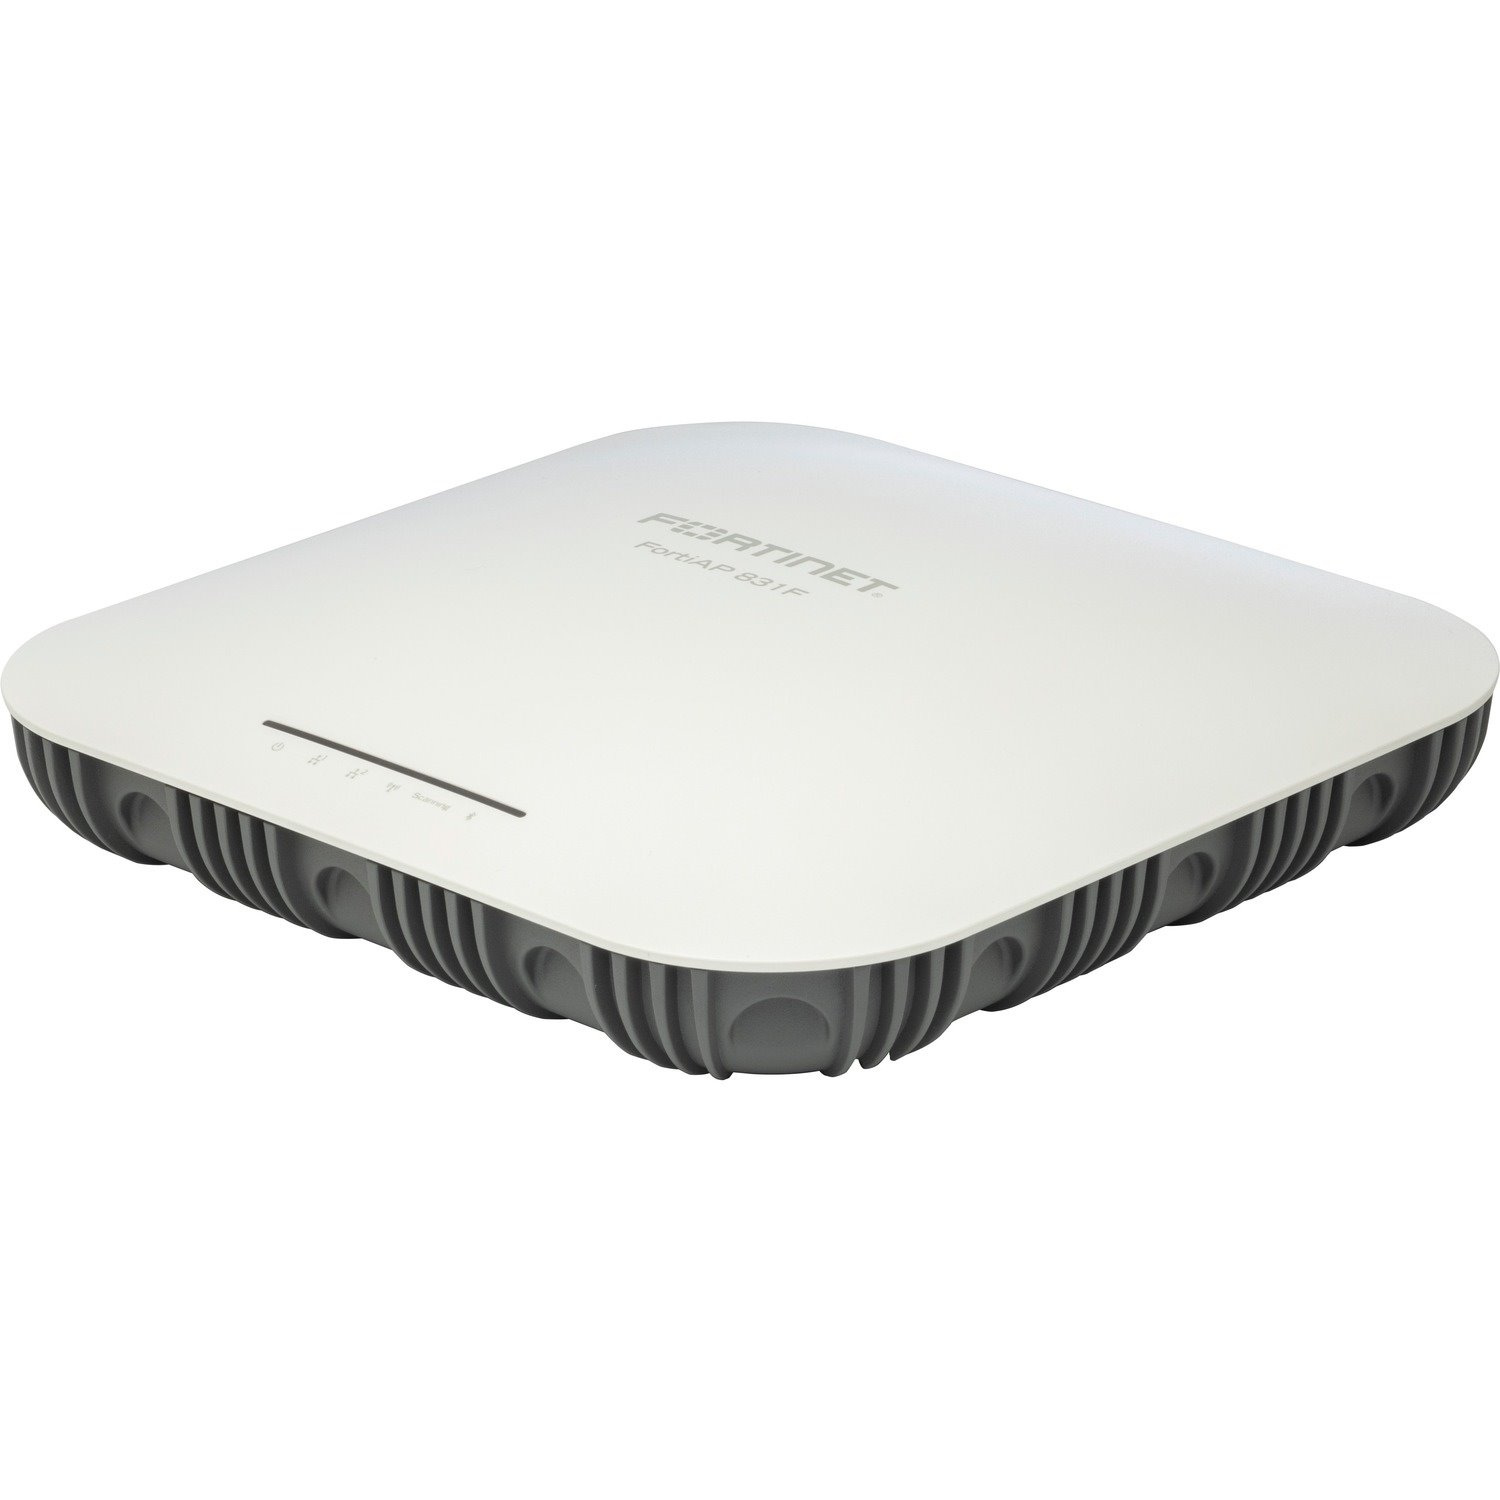 Fortinet FortiAP FAP-831F Dual Band 802.11ax 5.81 Gbit/s Wireless Access Point - Indoor